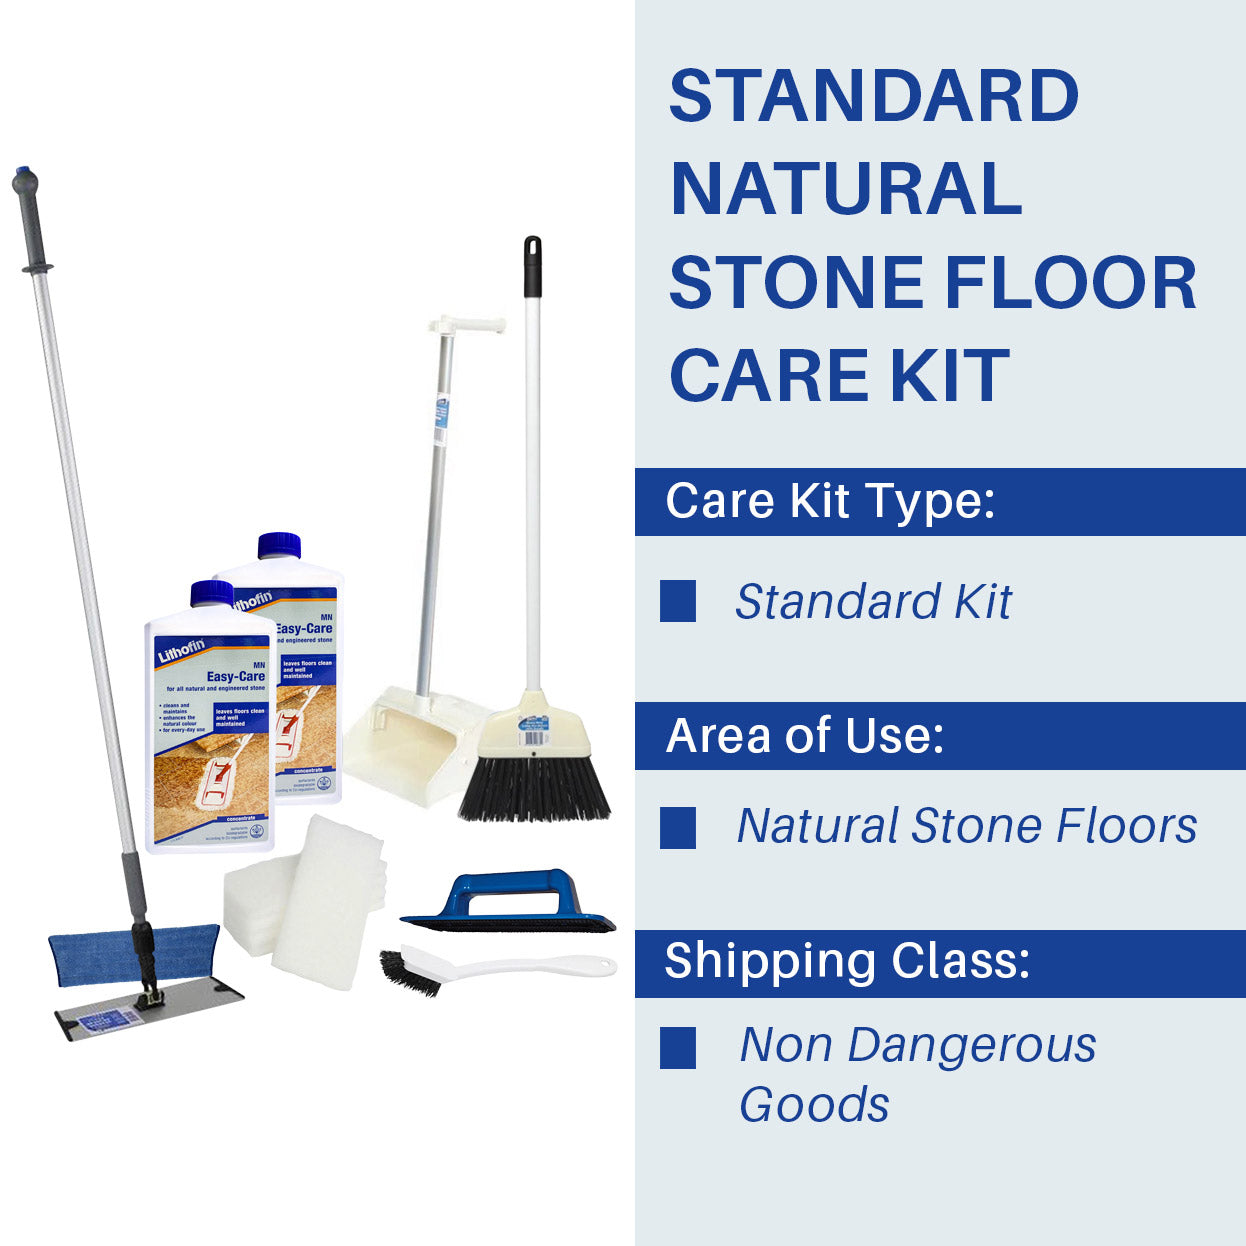 Standard Natural Stone Floor Care Kit - Stone Doctor Australia - ﻿﻿Marble, Travertine & Limestone > Daily Floor Cleaning > Microfibre Mopping System